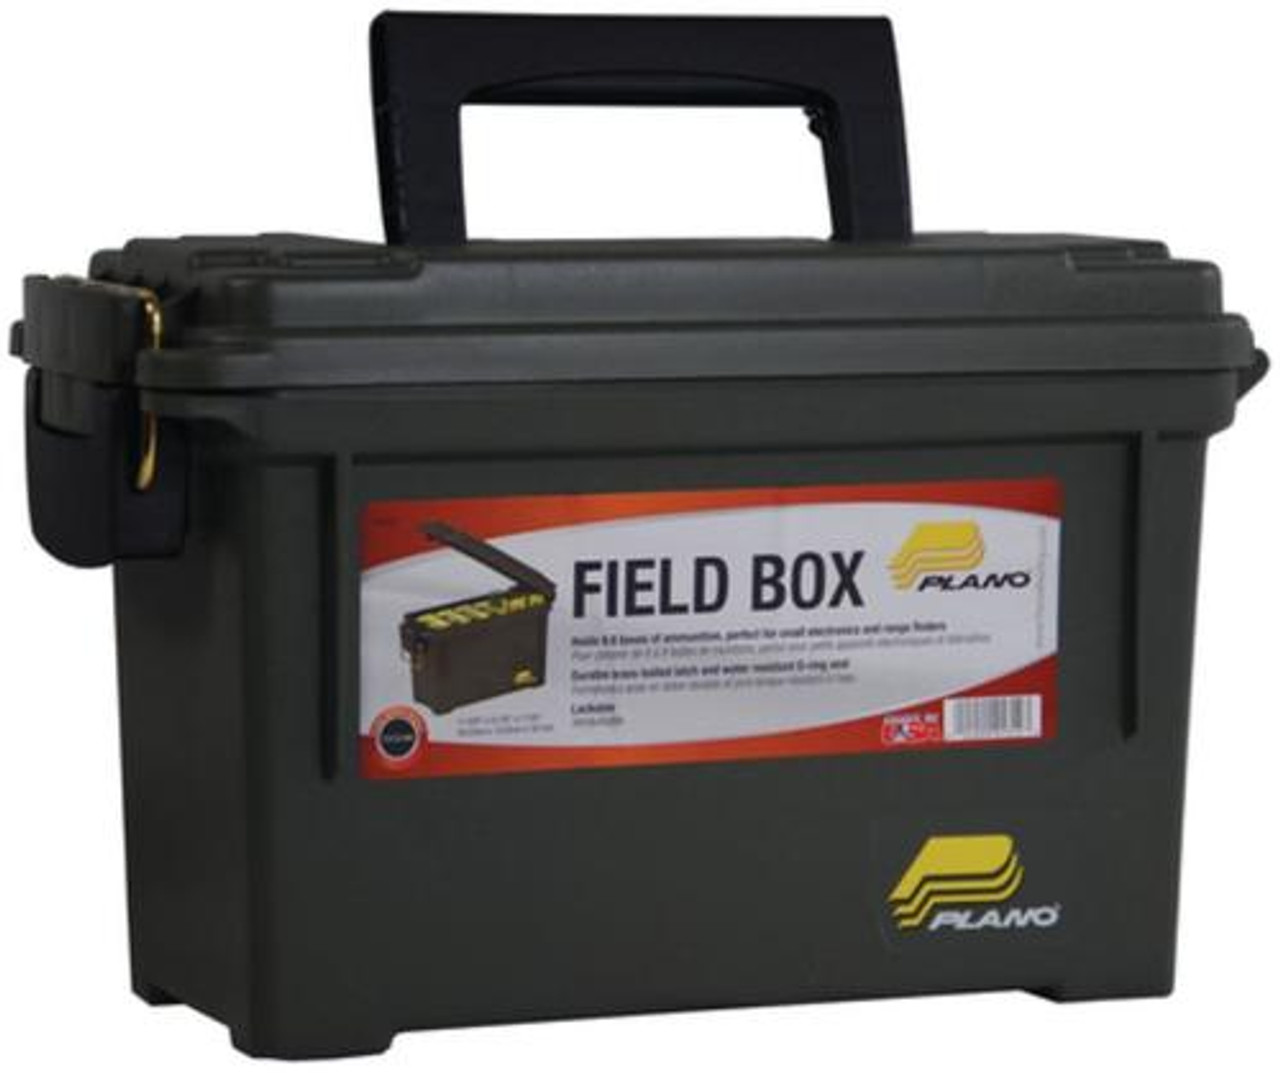 Plano 131200 Ammo Can, 6-8 Boxes, O-Ring, Water-Resistant, Polyethylene OD  